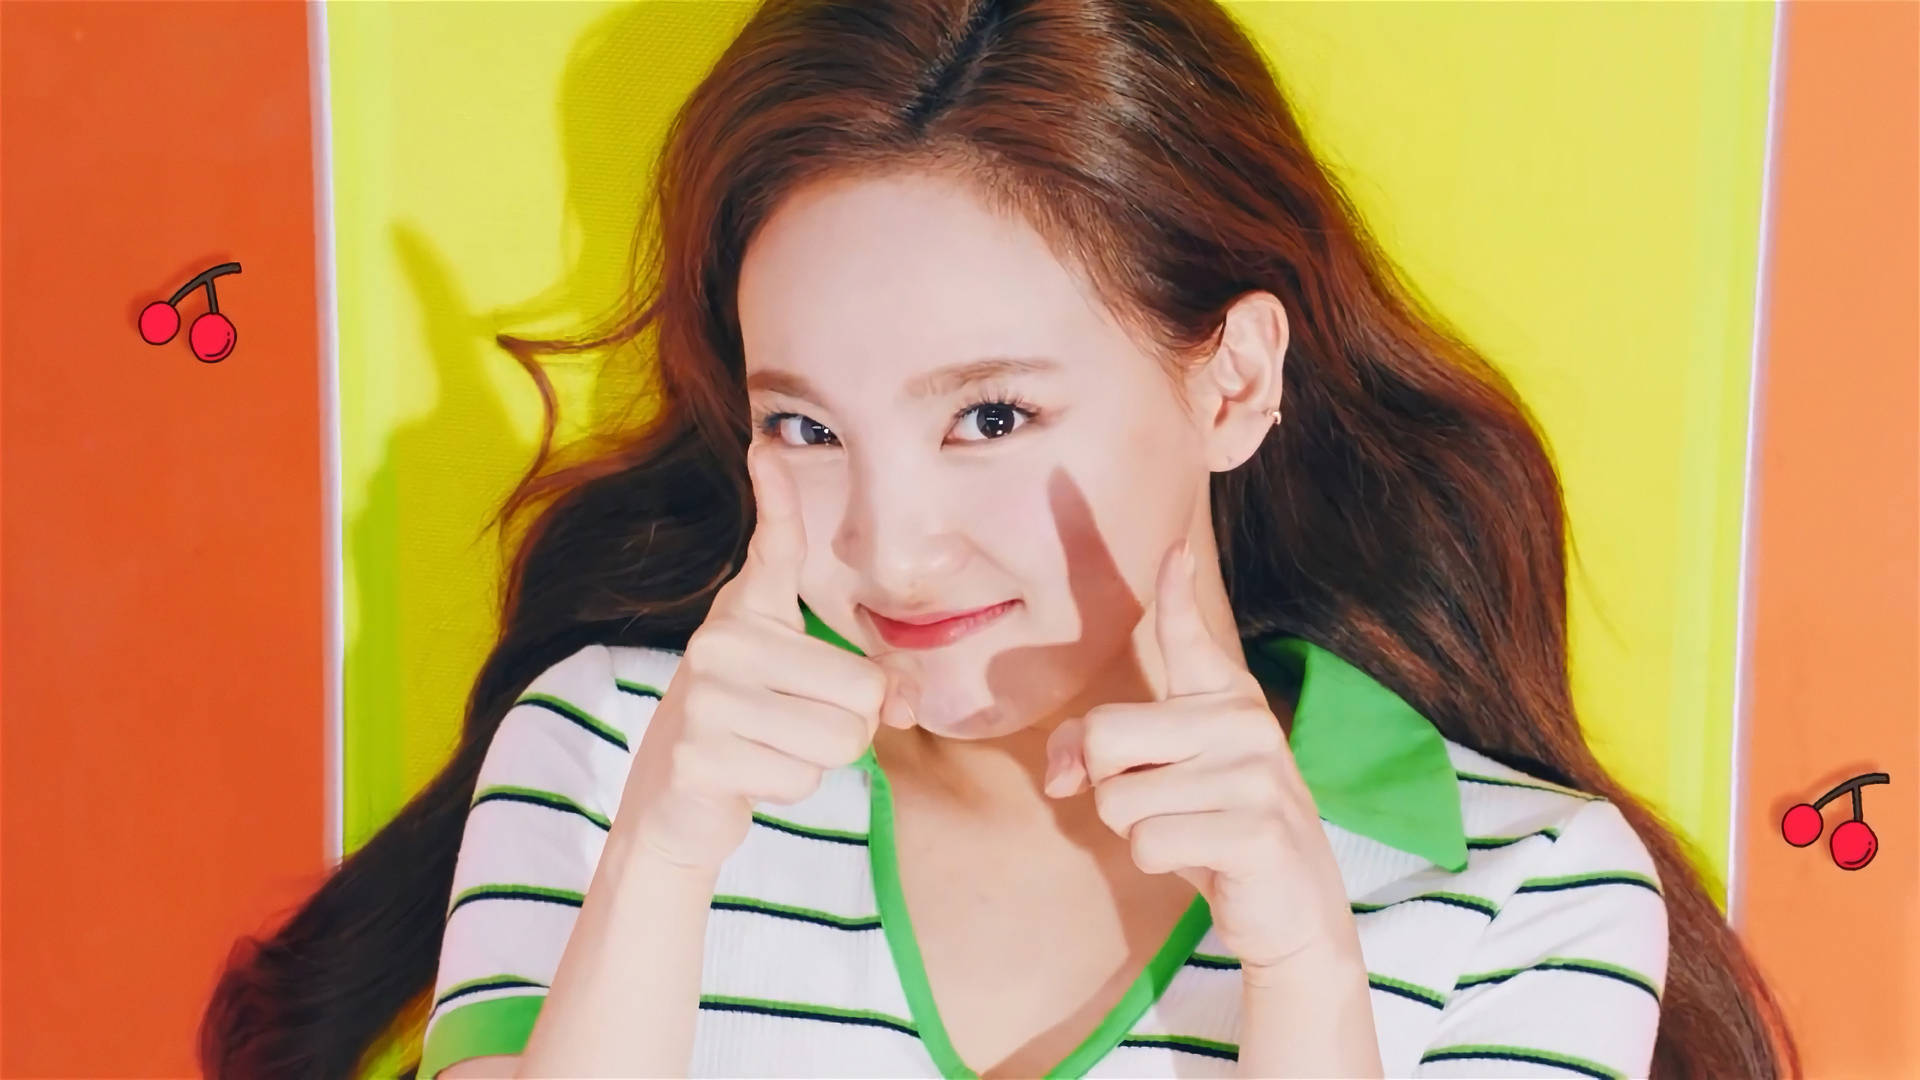 Twice Nayeon Pointing Up Wallpaper